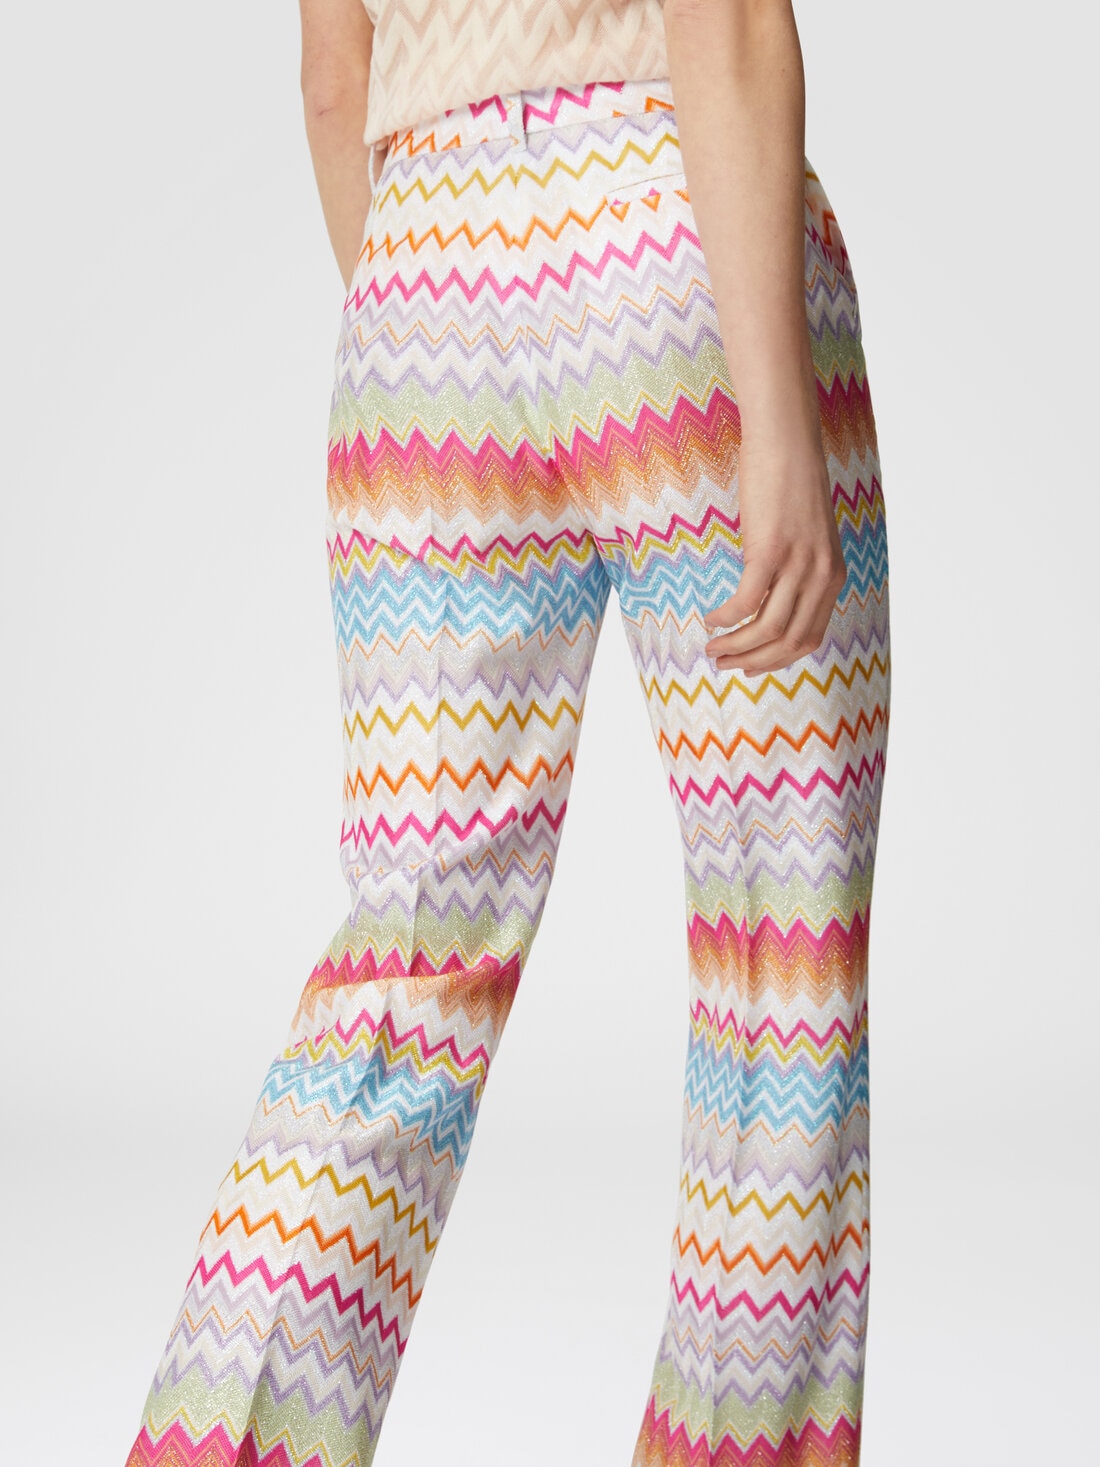 Capri trousers in chevron lamé knit with sequins, Multicoloured  - DS24SI1TBR00YBSM9CH - 4